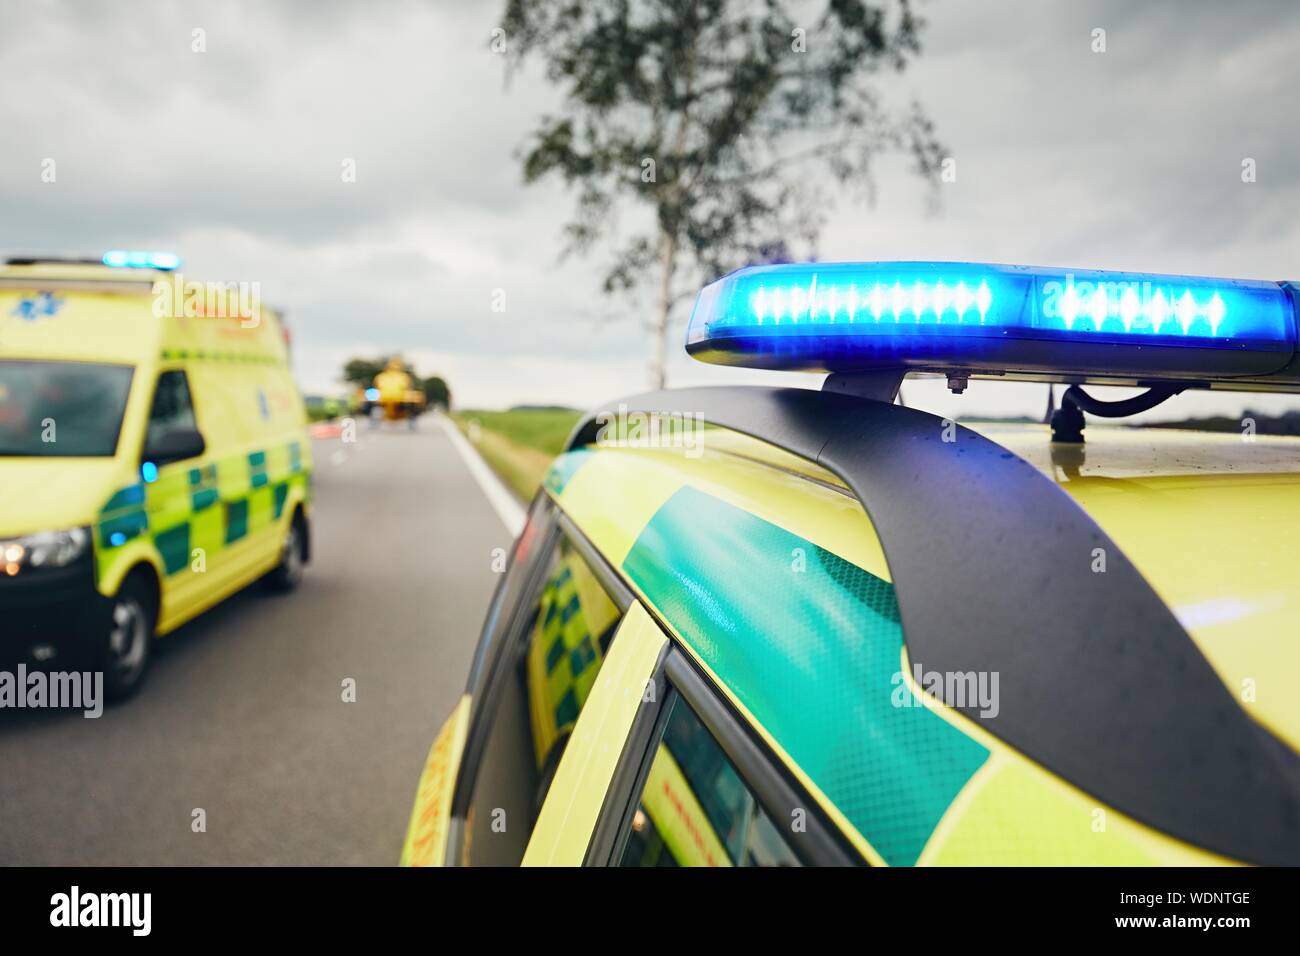 Close-up Of Paramedic Vehicles On Road Stock Photo